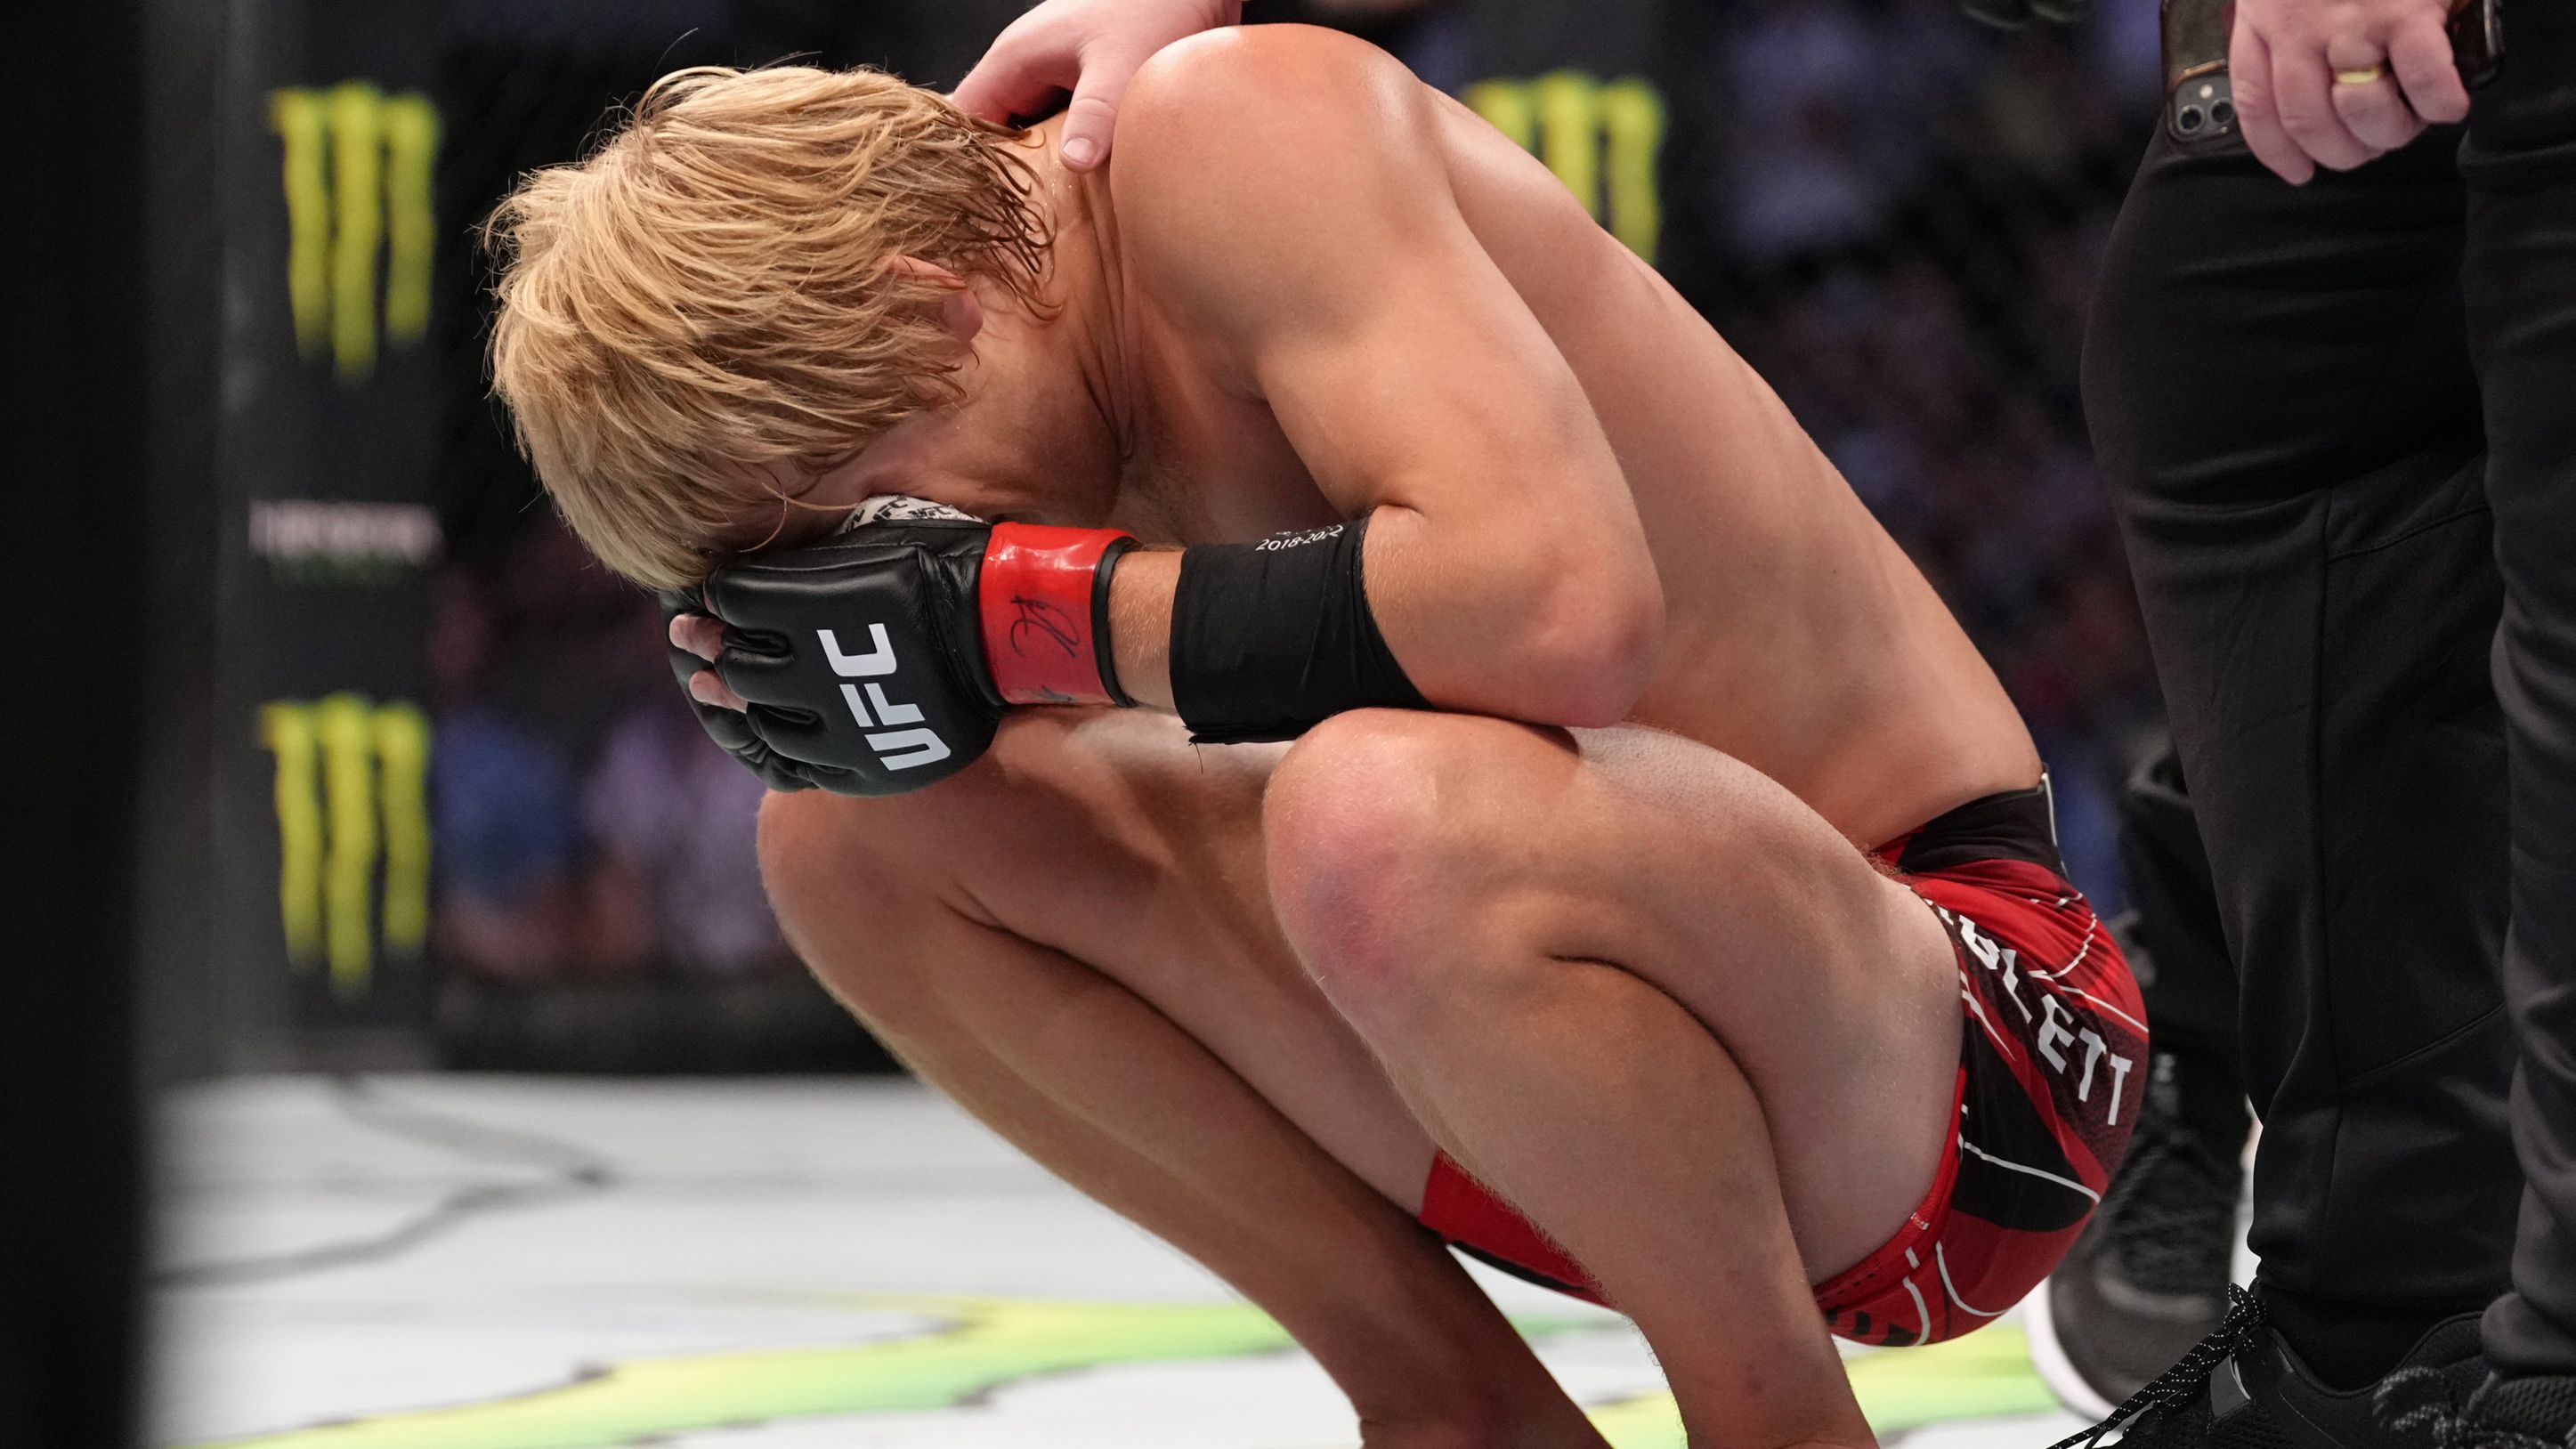 Paddy Pimblett celebrates after his victory over Jordan Leavitt in a lightweight fight at the UFC Fight Night 208.